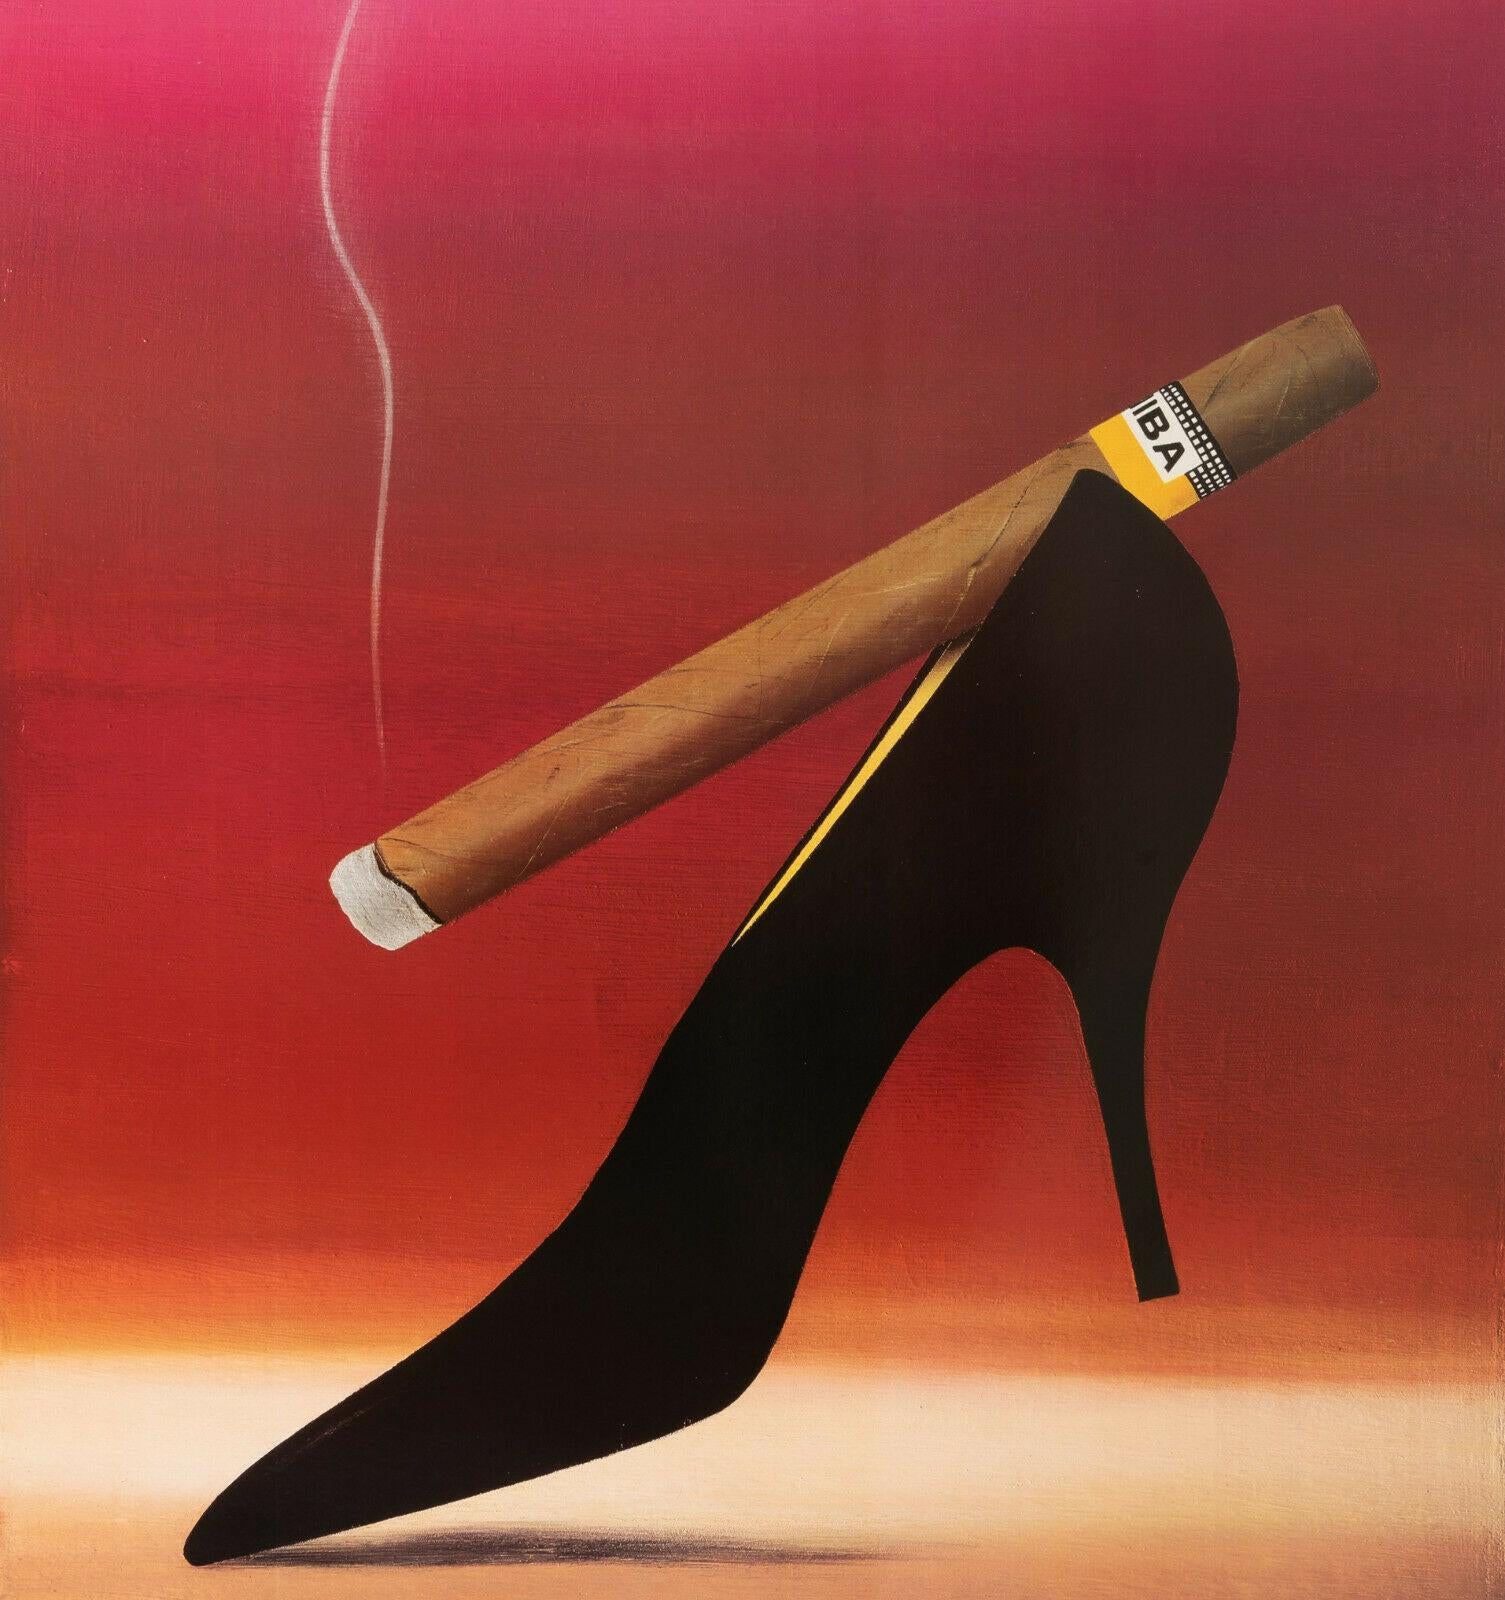 Original and hand signed Cohiba cigars poster dating from 1994 by Razzia (Gerard Courbouleix Deneriaz; b.1950).

This is a hand signed open edition poster and not a reproduction.

A Cohiba cigar is placed on a black pump. The letters 